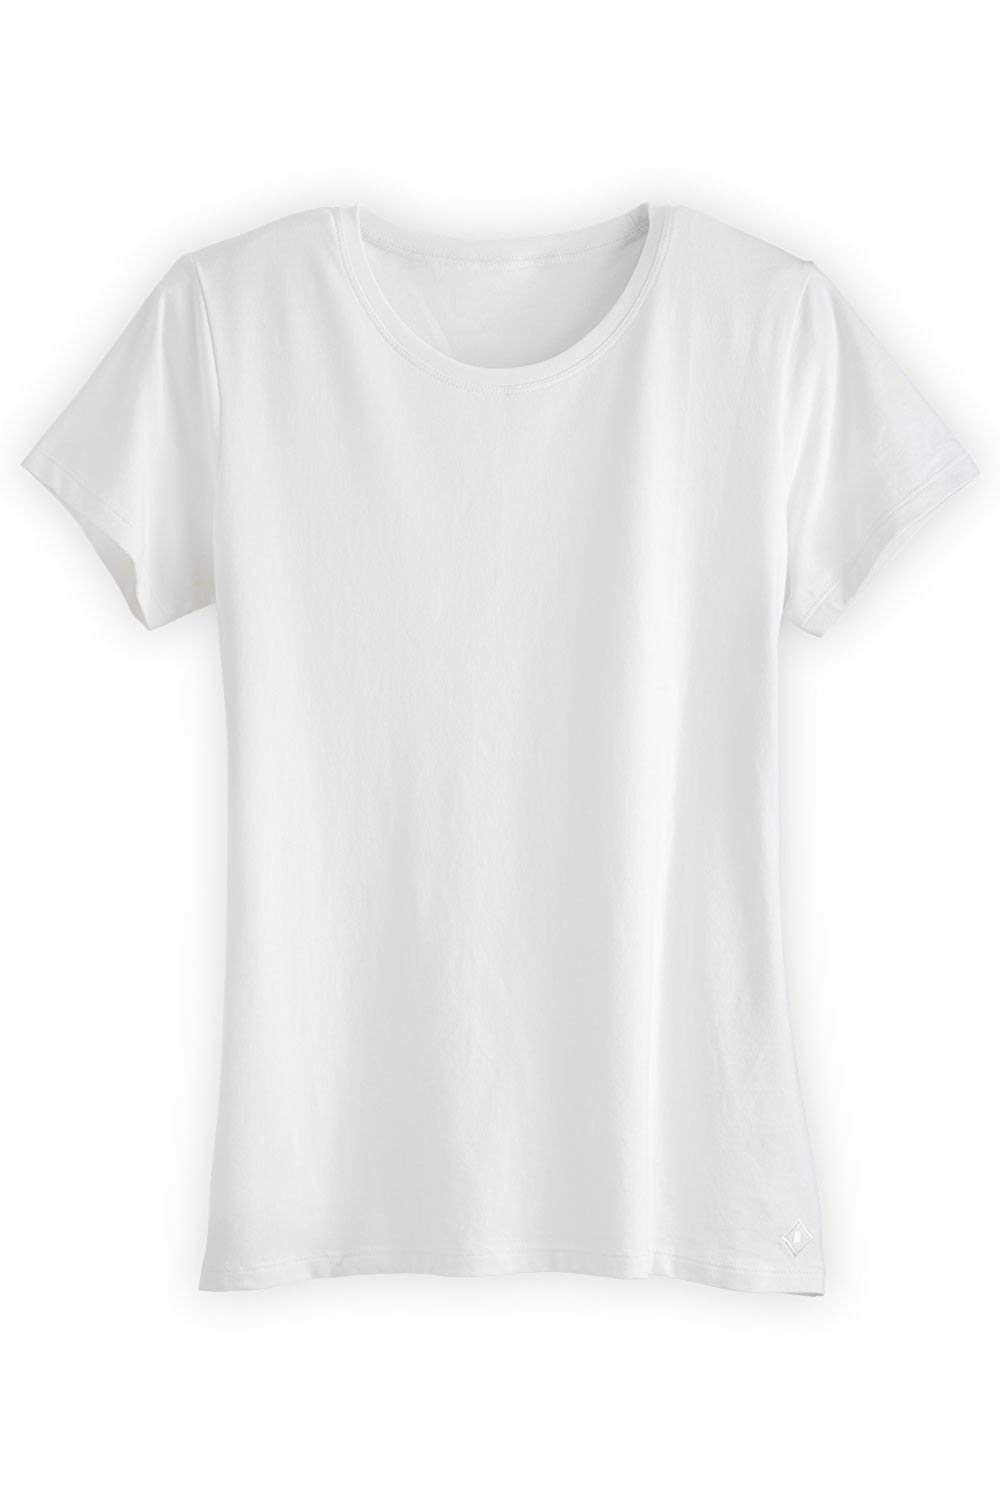 The 20 Best White T-Shirts on Amazon 